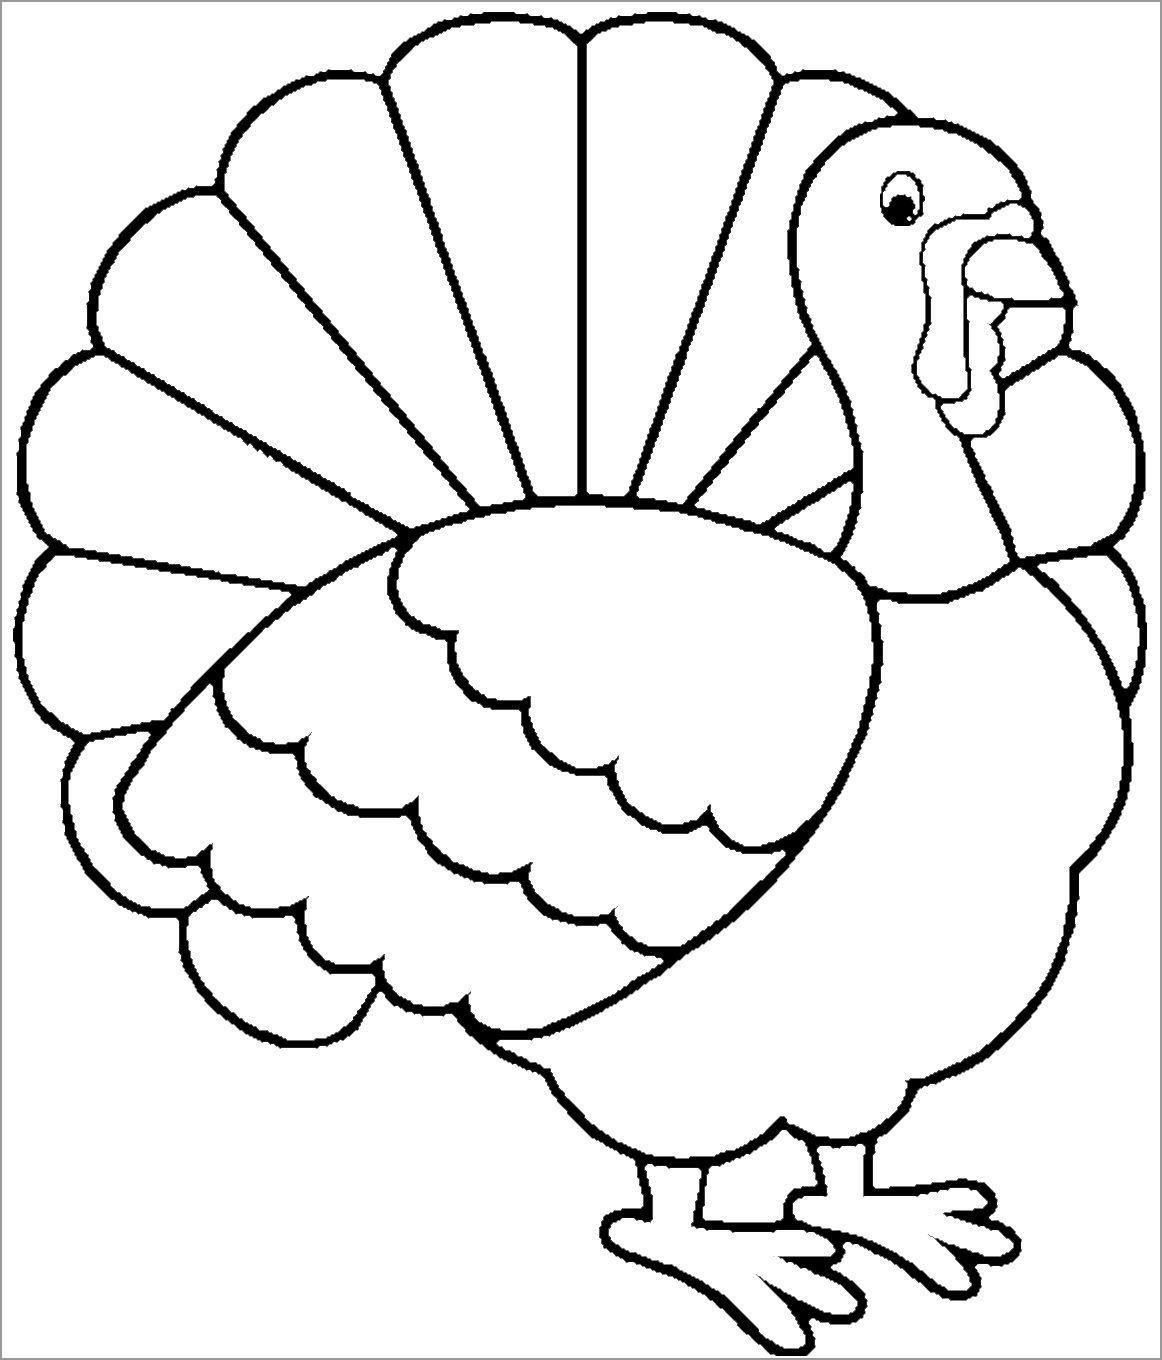 Turkey Coloring Page Free   ColoringBay